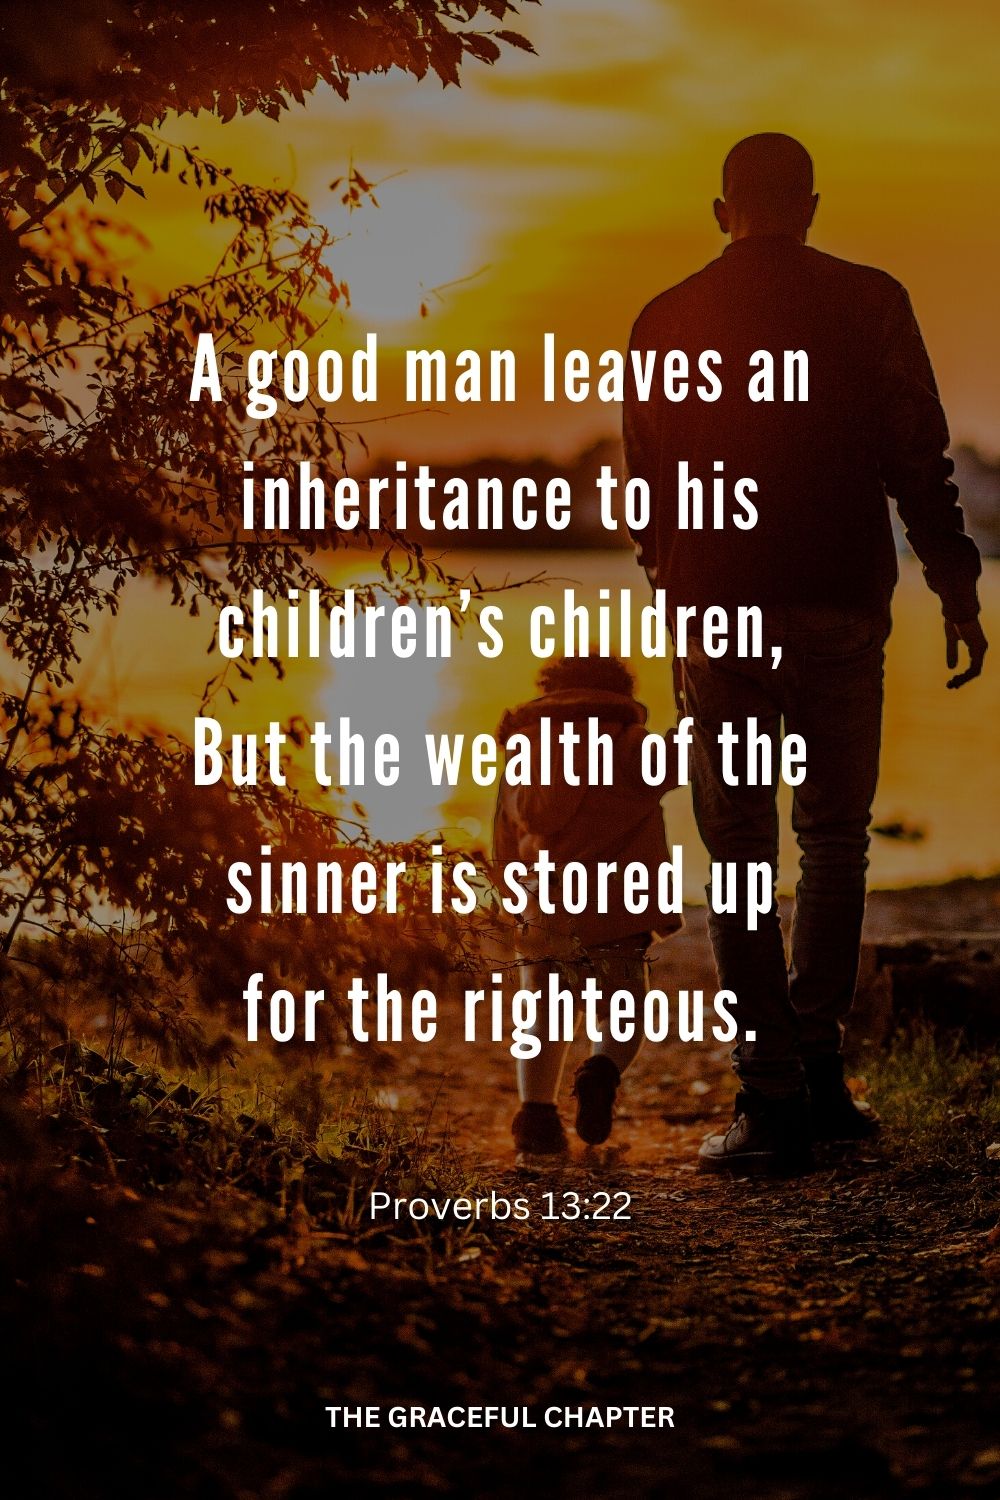 A good man leaves an inheritance to his children’s children, But the wealth of the sinner is stored up for the righteous. Proverbs 13:22